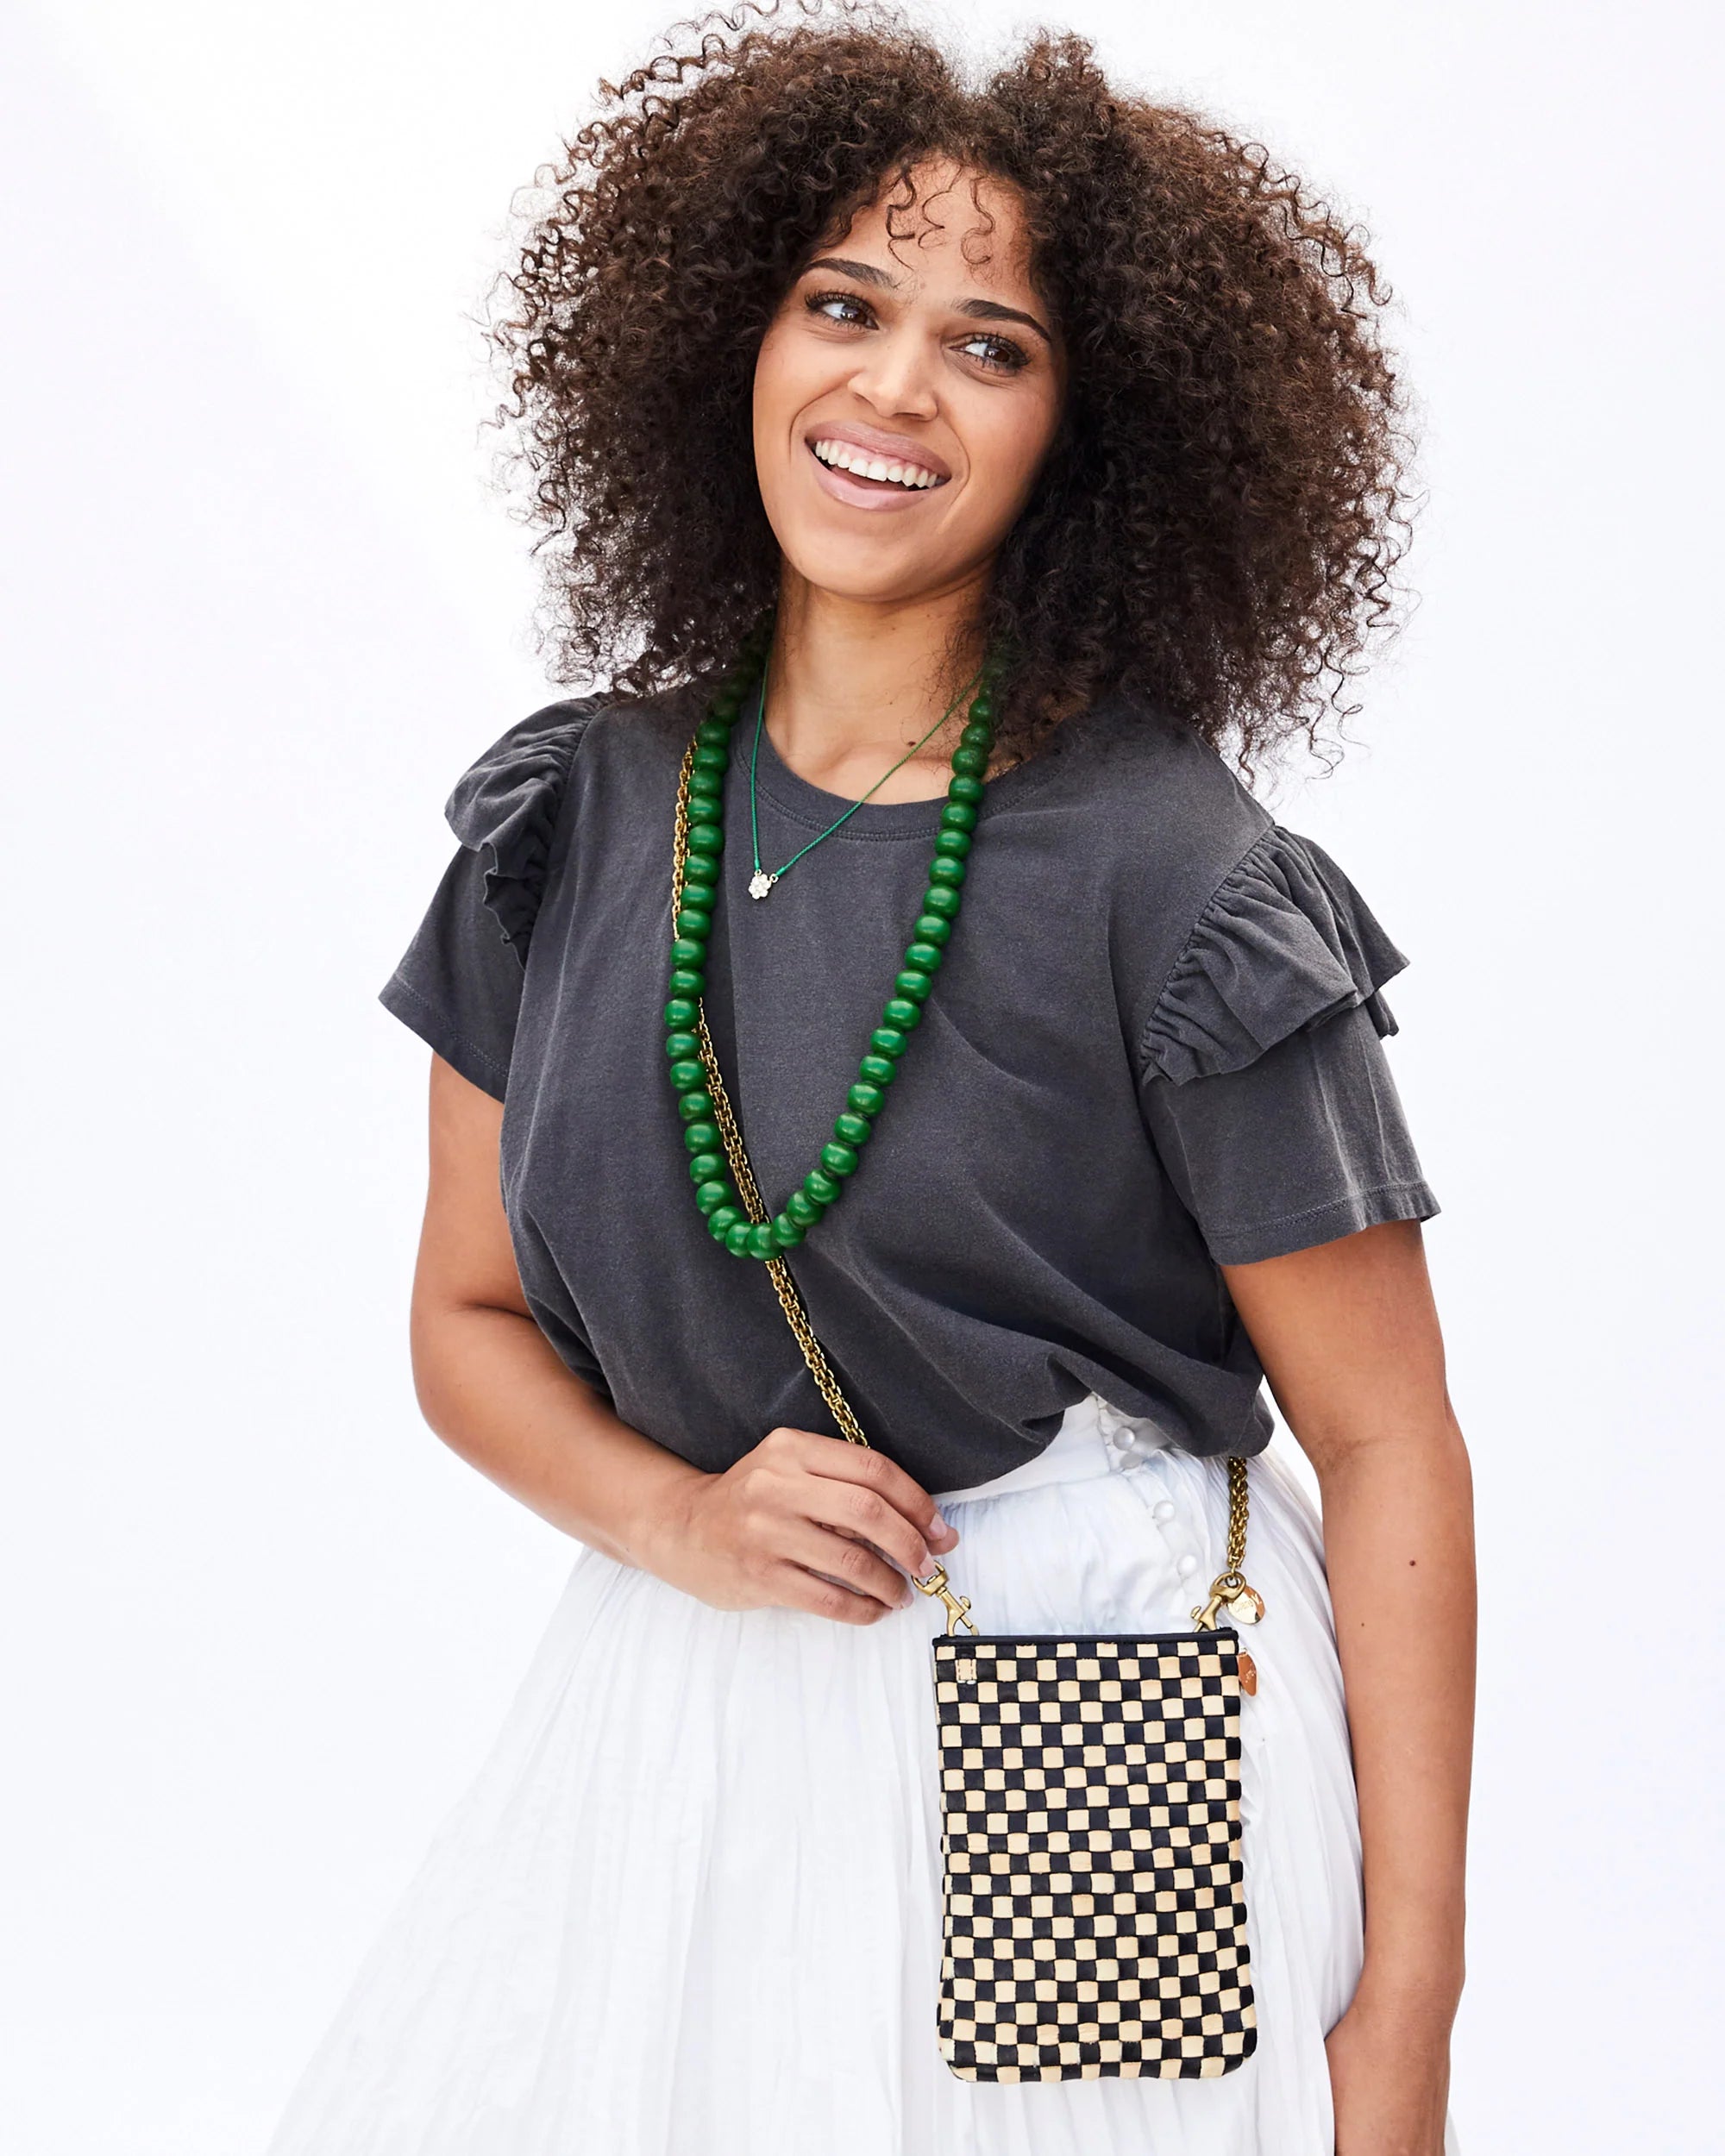 A person with curly hair smiles while posing against a white background. They wear a dark ruffled shirt, a green beaded necklace, and a white pleated skirt. They carry Poche by Clare Vivier, an everyday phone bag made of handwoven leather with a detachable crossbody strap.